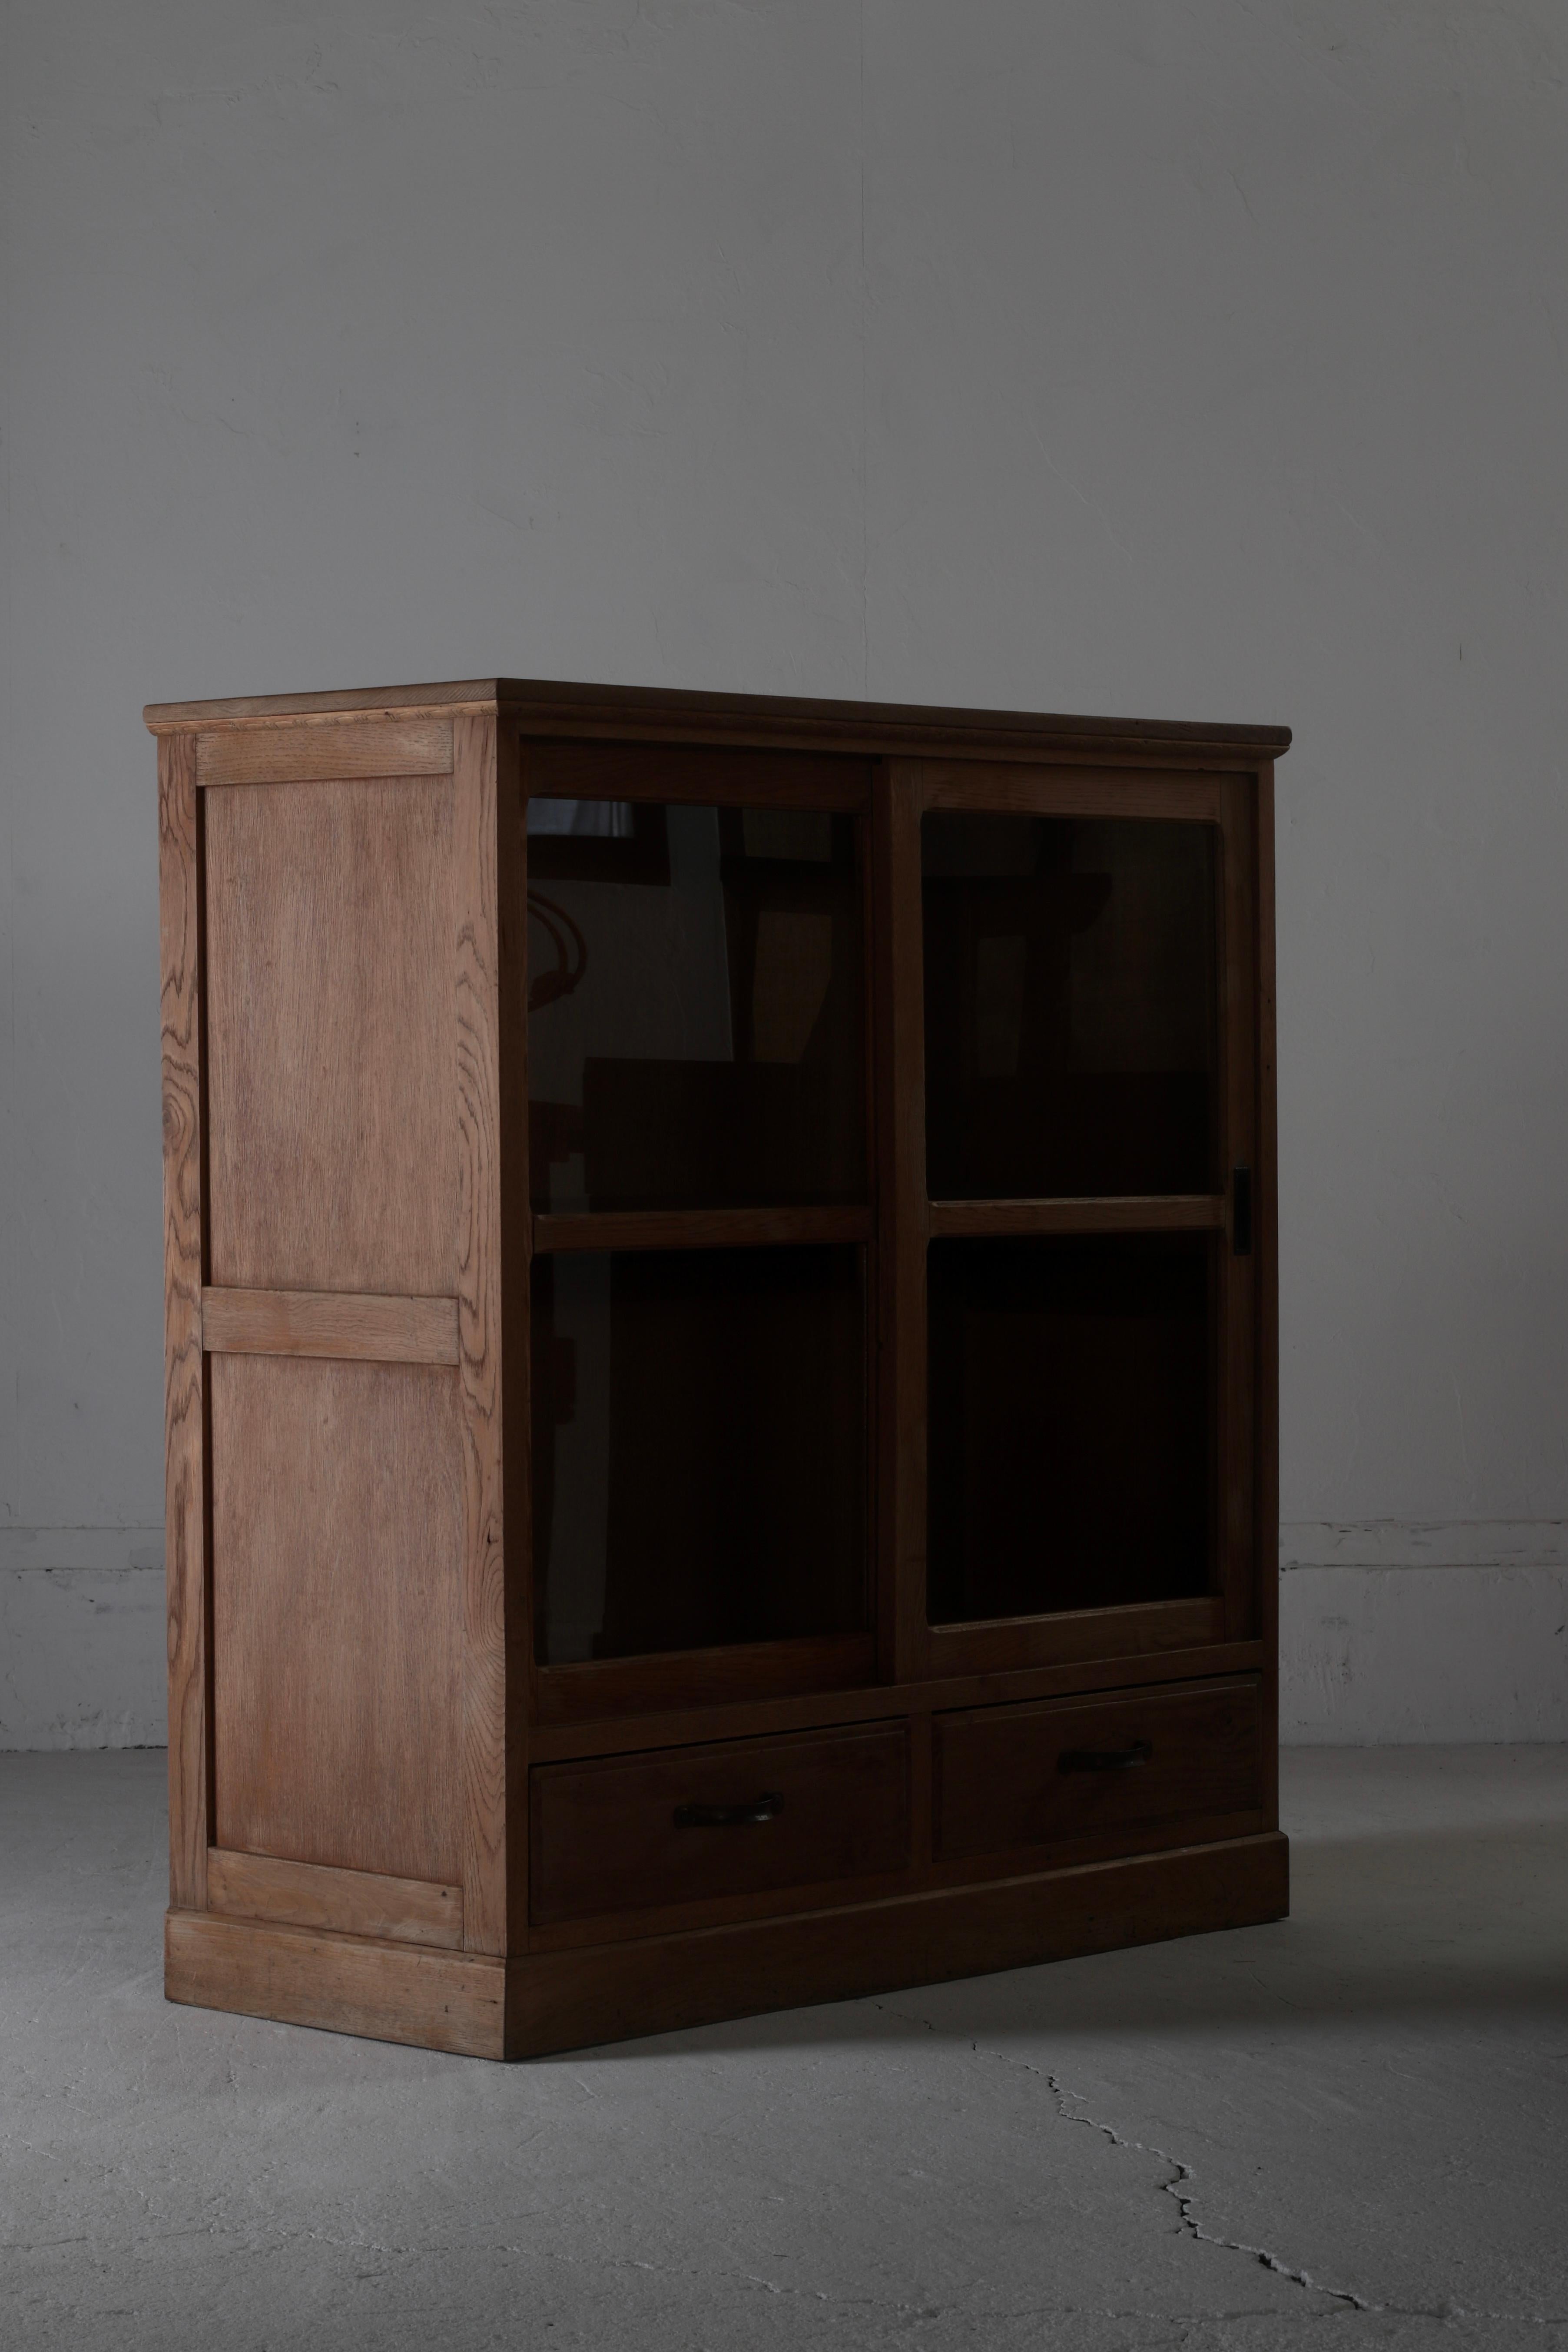 Woodwork Japanese Antique Glass Cabinet / Storage Cupboard / Early Showa Period WabiSabi For Sale